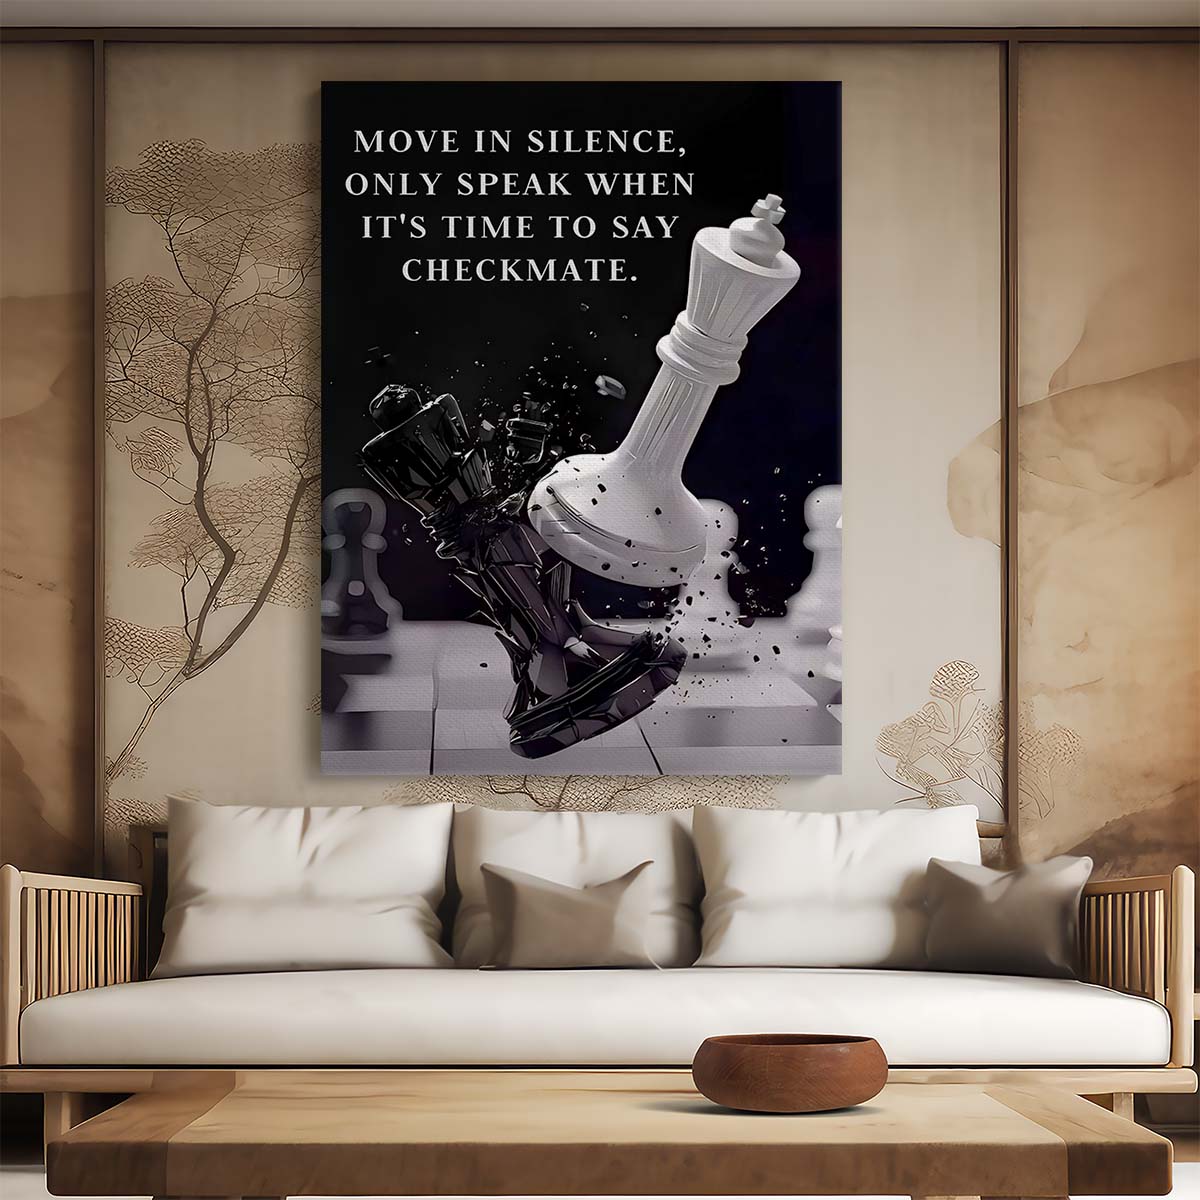 Move In Silence Wall Art by Luxuriance Designs. Made in USA.